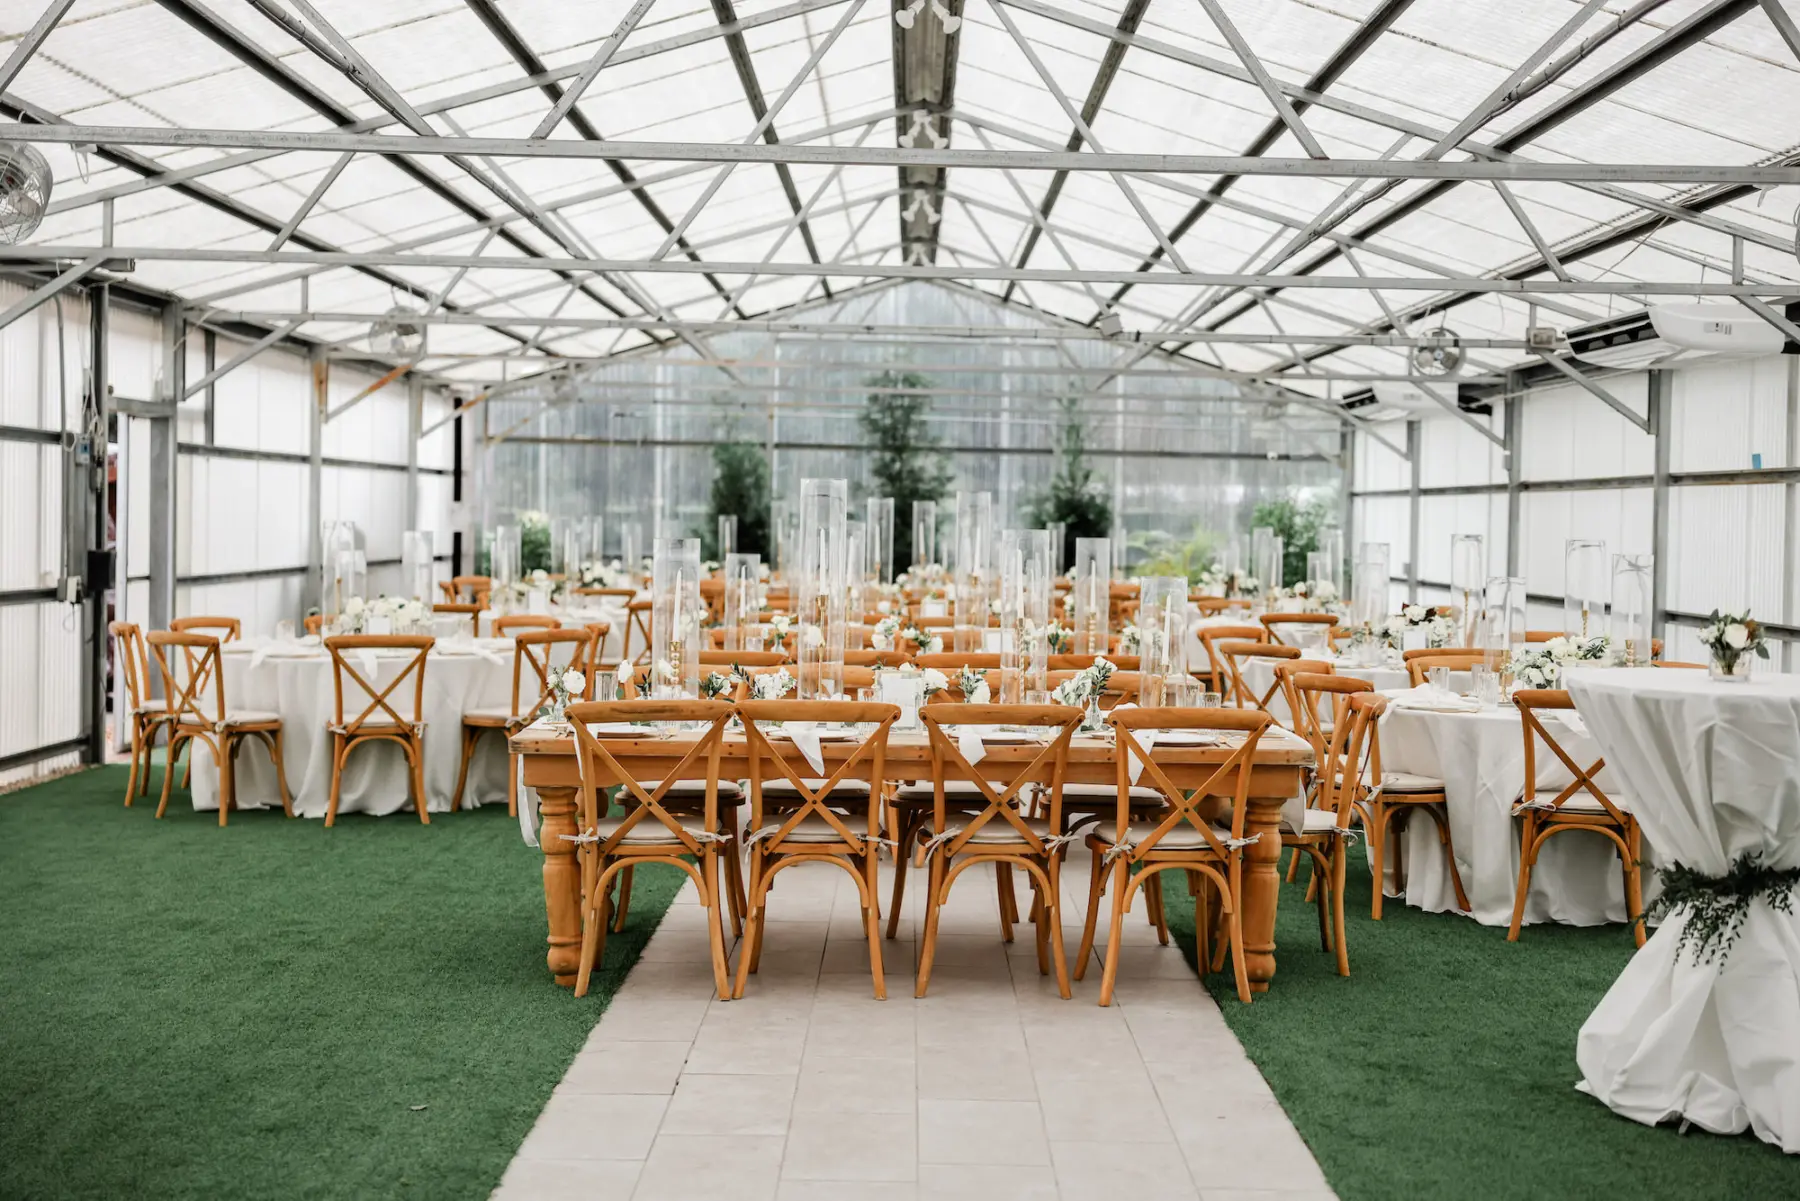 Clear Tented Classic White and Gold Wedding Reception Inspiration | Wooden Tables and Crossback Chairs | Tampa Bay Kate Ryan Event Rentals | Planner Blue Skies Weddings and Events | Private Estate Mision Lago